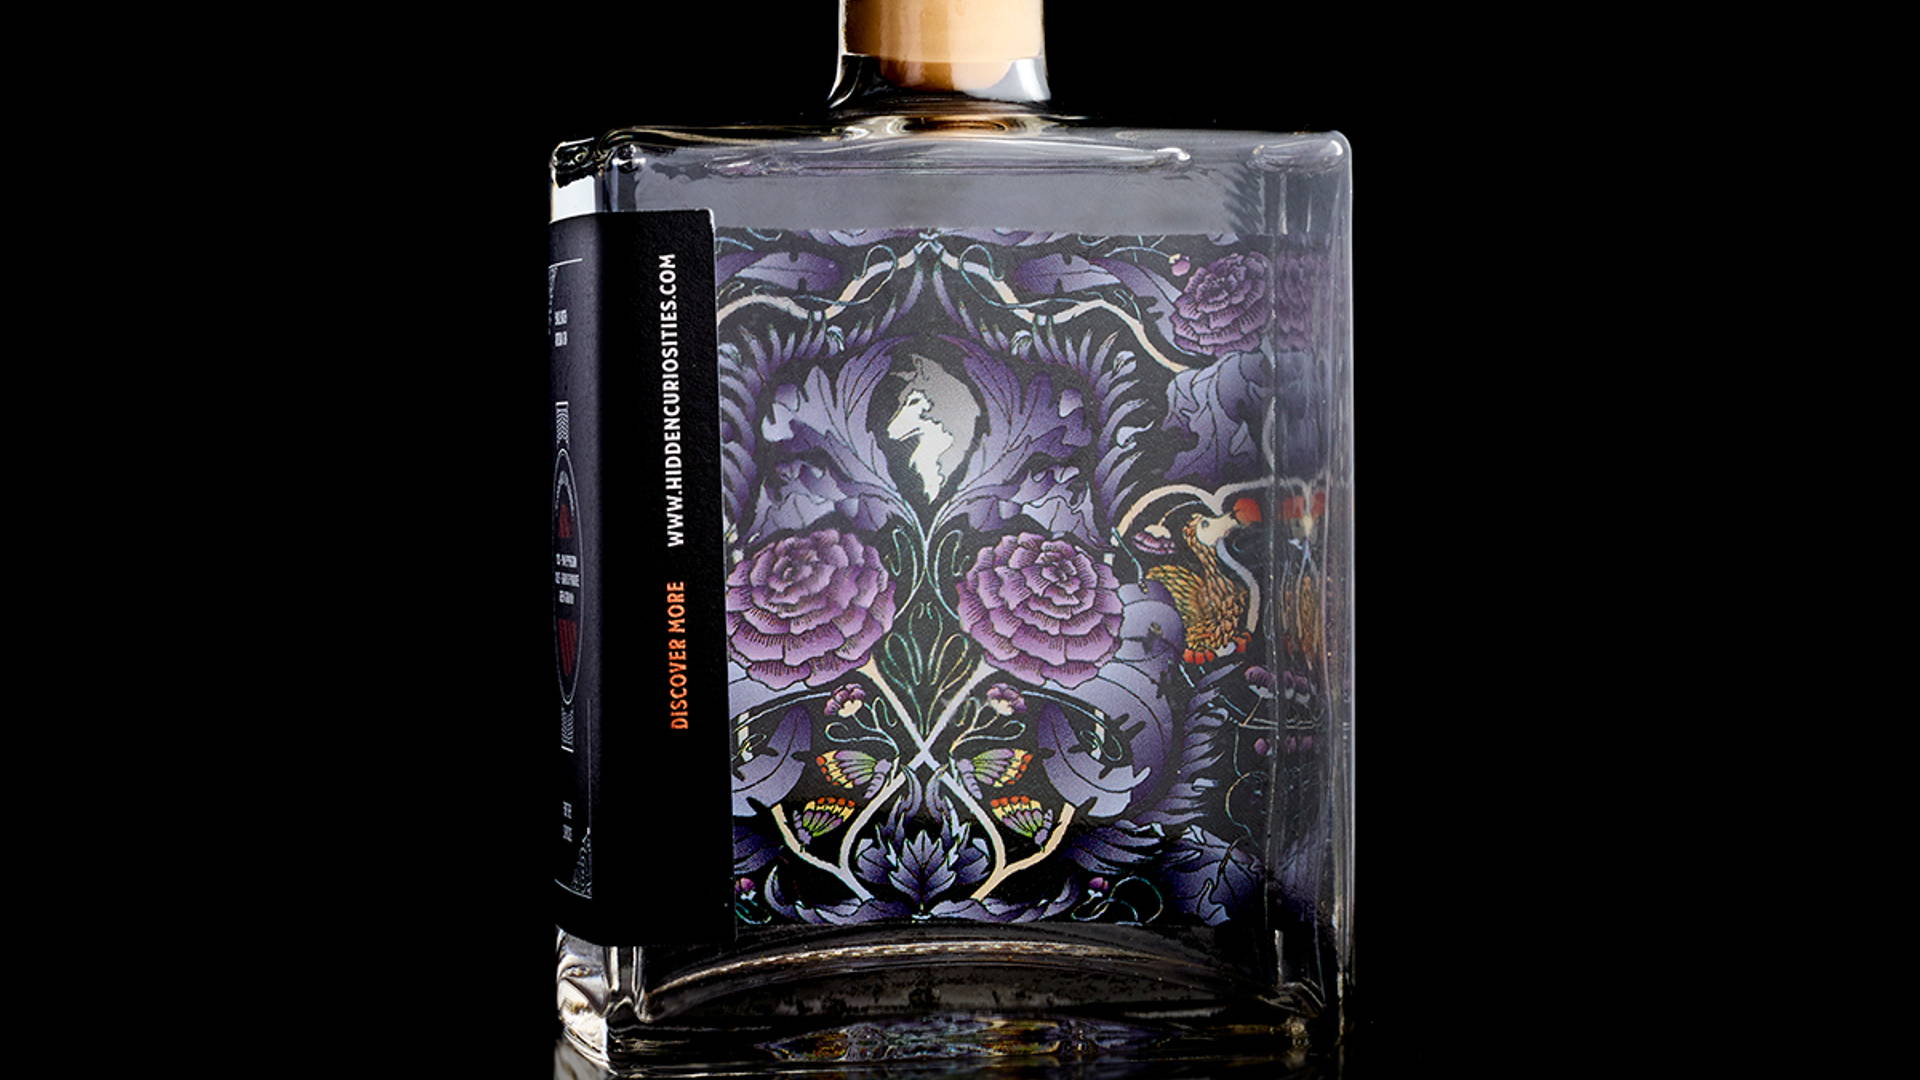 Featured image for Fulfill Your Curiosity With This Exquisite Gin Packaging